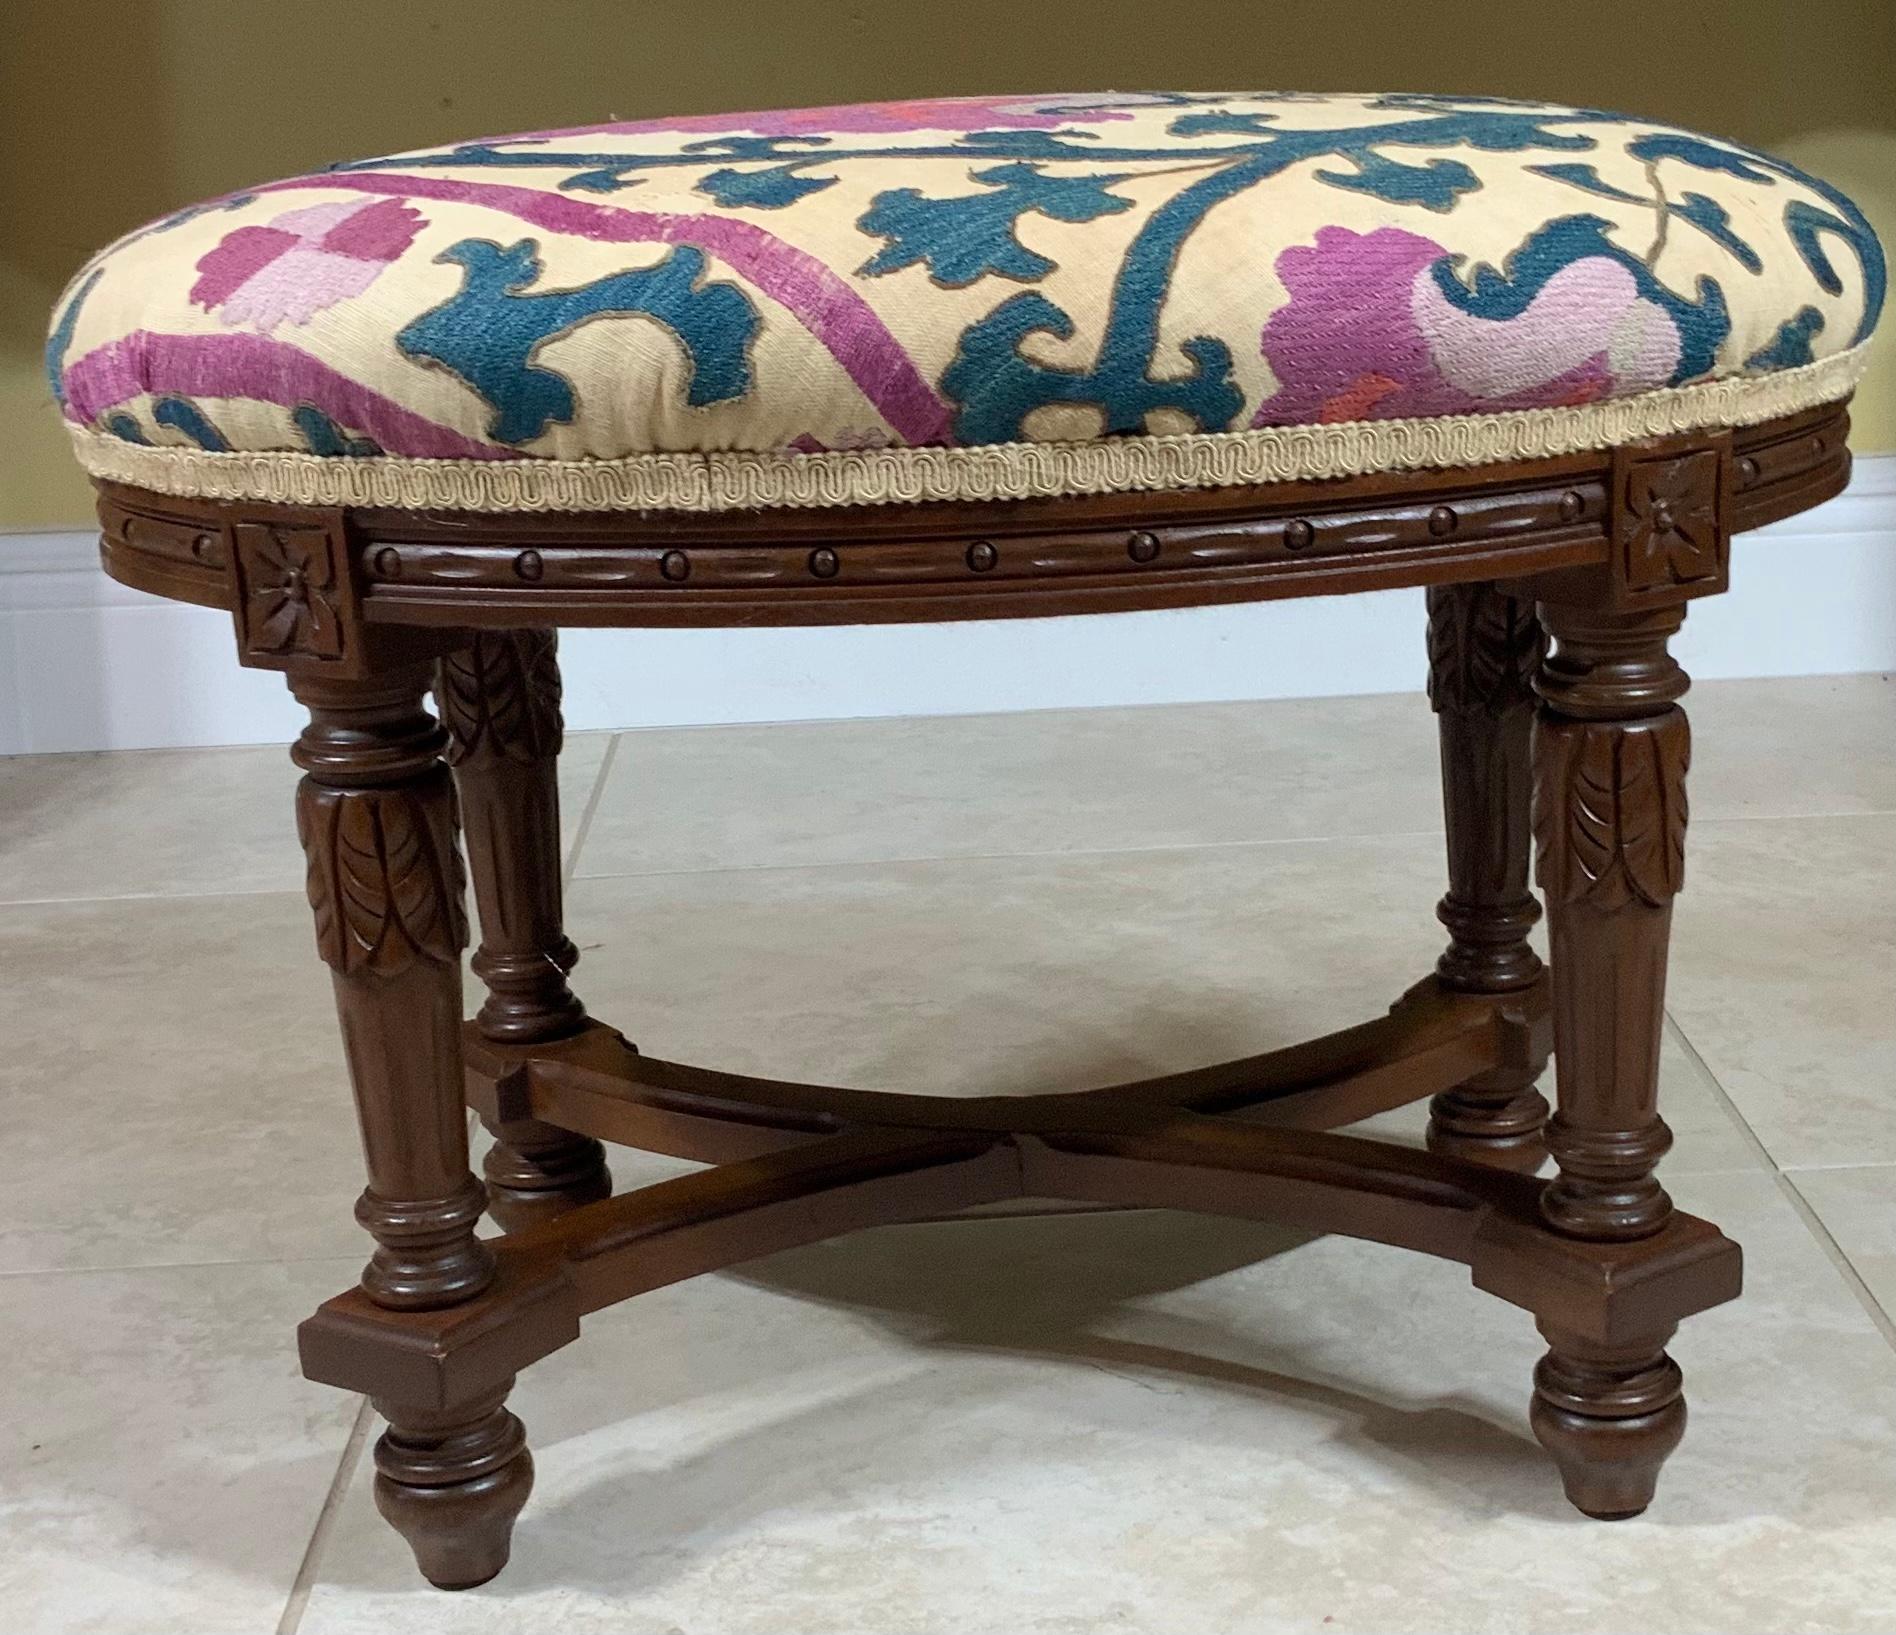 Hand-Carved Over Vintage Suzani Upholstered Wood Foot Stool